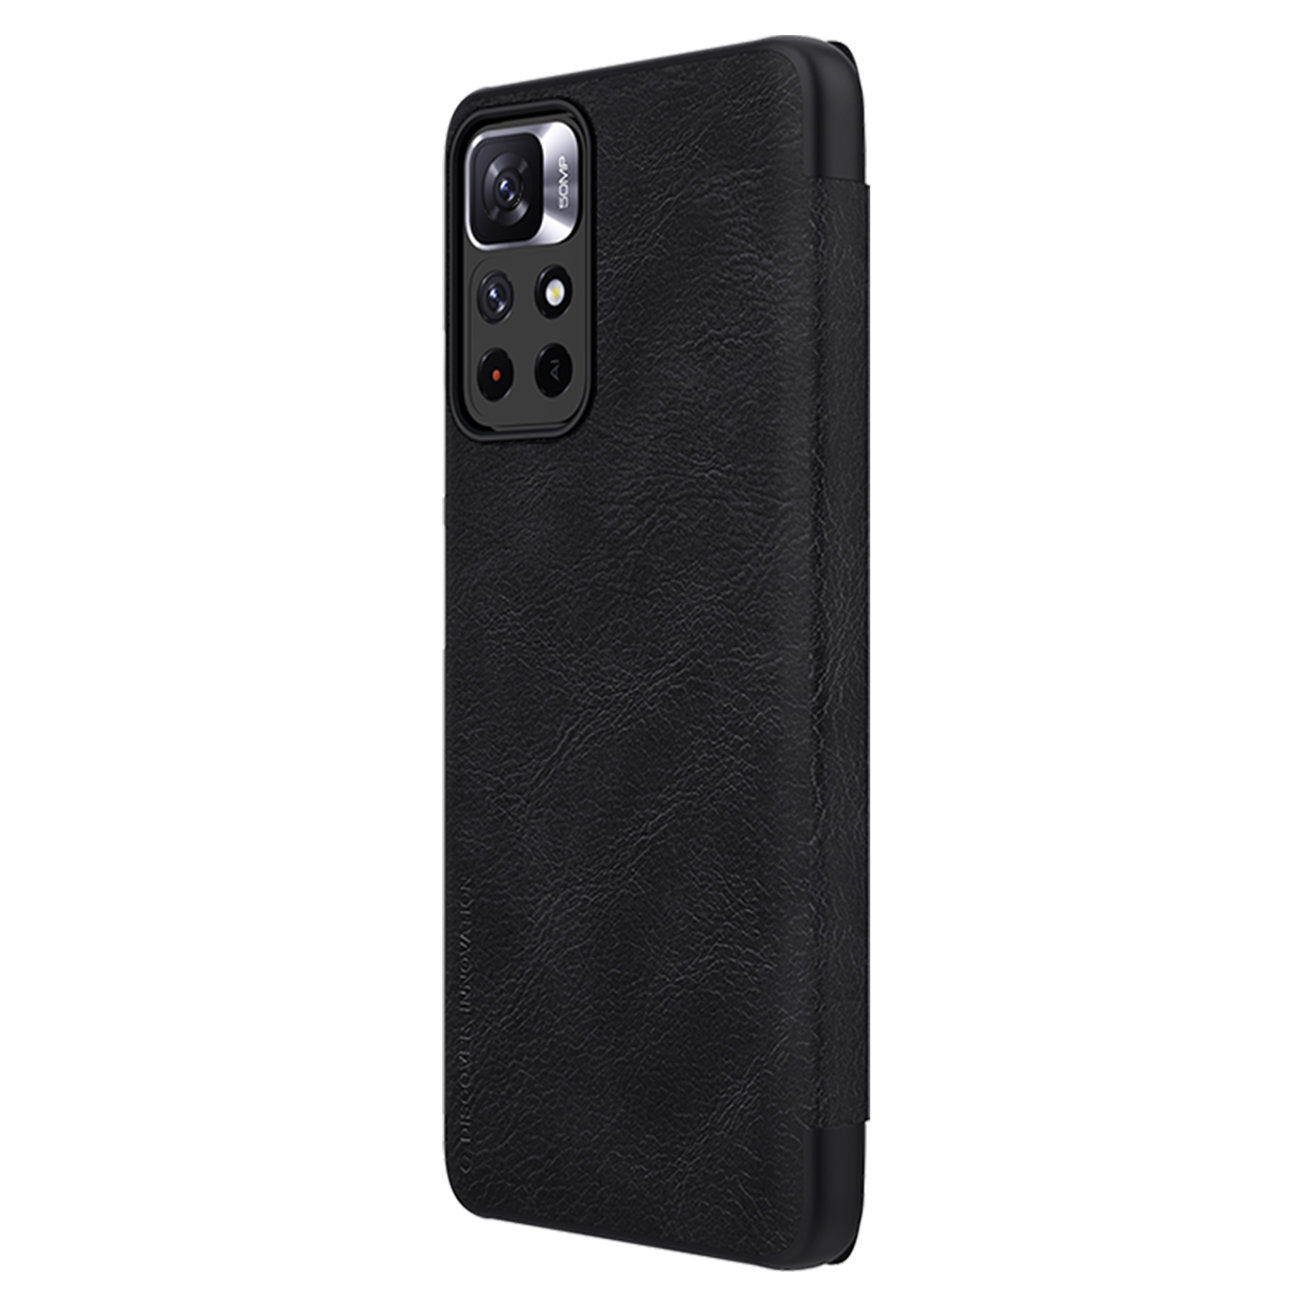 Nillkin Qin Case Case for Xiaomi Redmi Note 11T 5G / Note 11S 5G / Note 11 5G (China) / Poco M4 Pro 5G Camera Protector Holster Cover Flip Cover Black